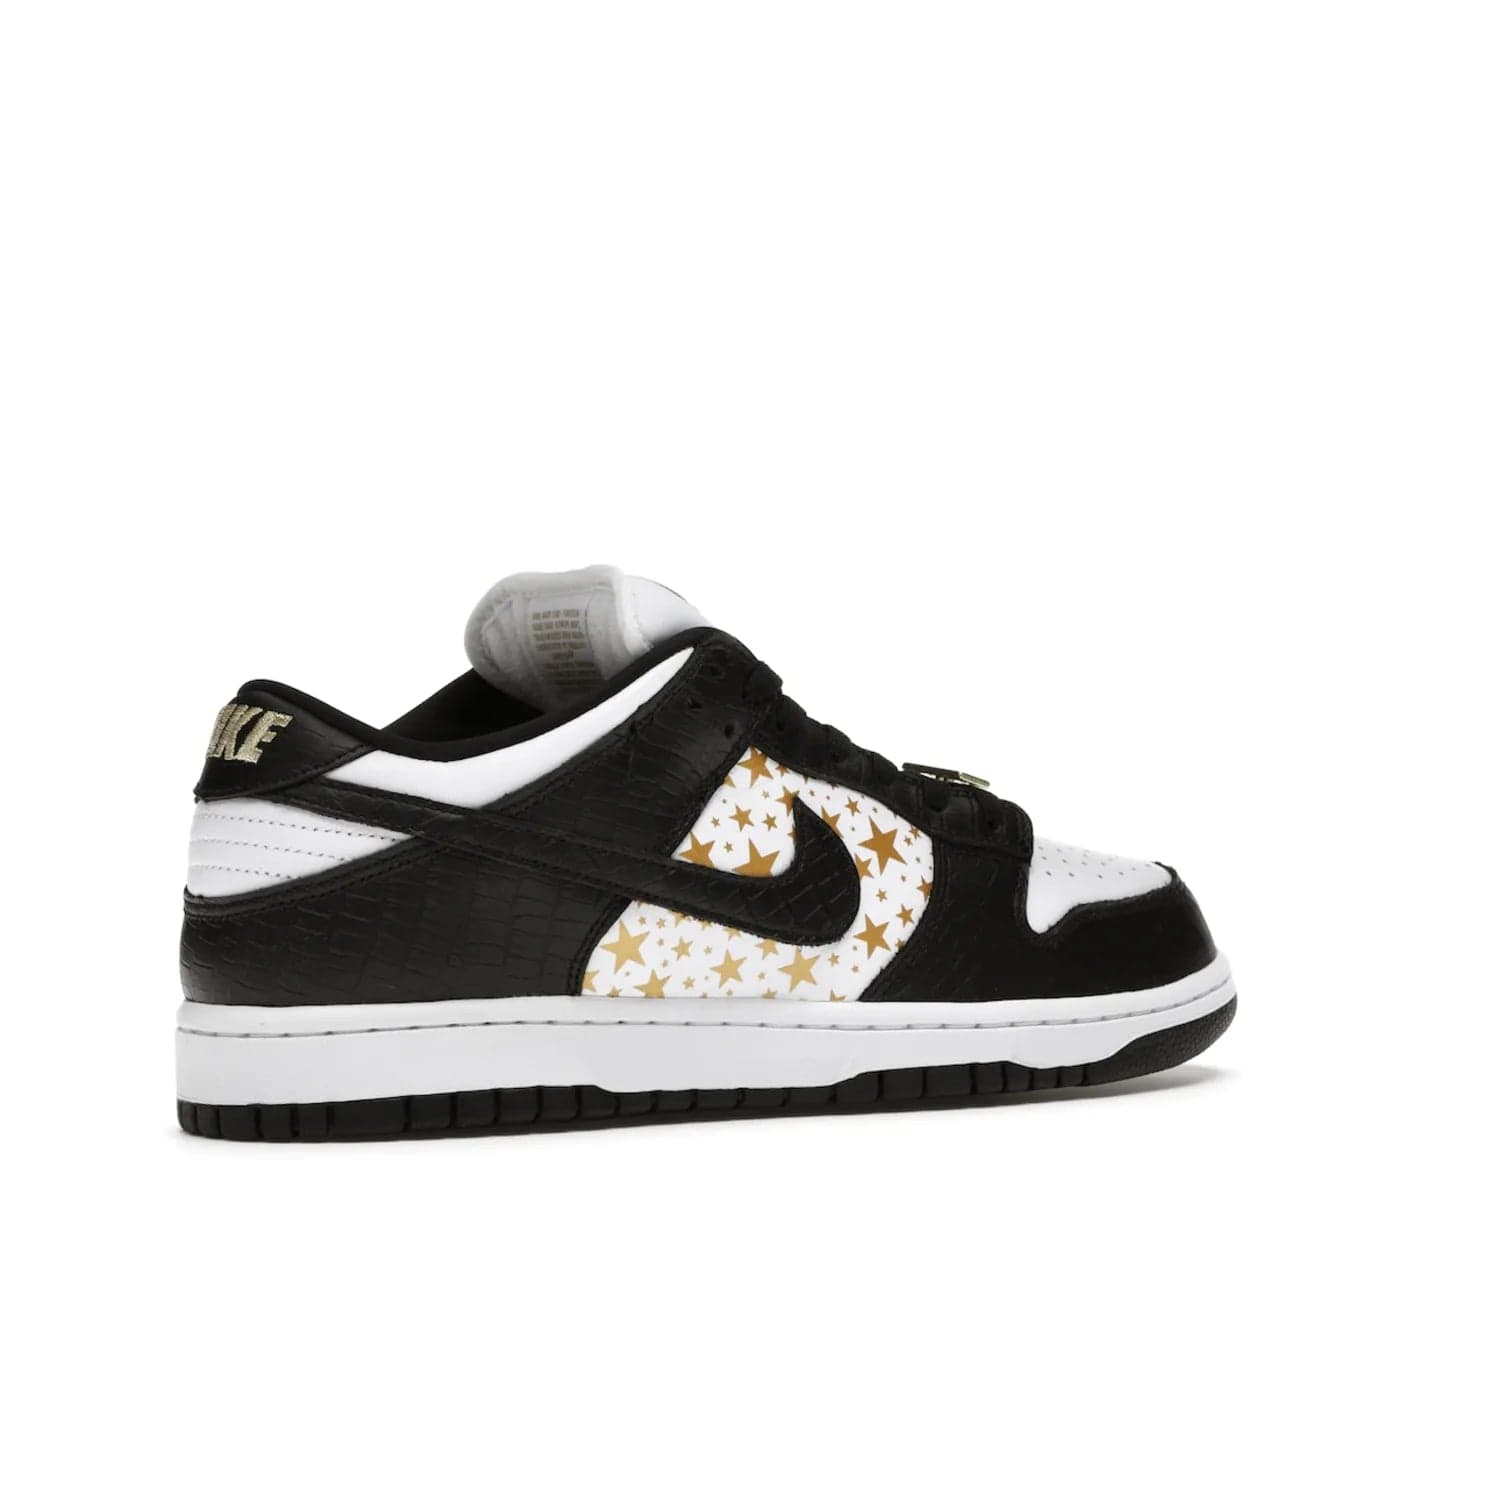 Nike SB Dunk Low Supreme Stars Black (2021) - Image 34 - Only at www.BallersClubKickz.com - Retro style and signature details make the Nike SB Dunk Low Supreme Black a must-have. This special edition shoe features a white leather upper and black croc skin overlays complemented by gold stars and deubré. Enjoy a piece of SB history and grab yours today.